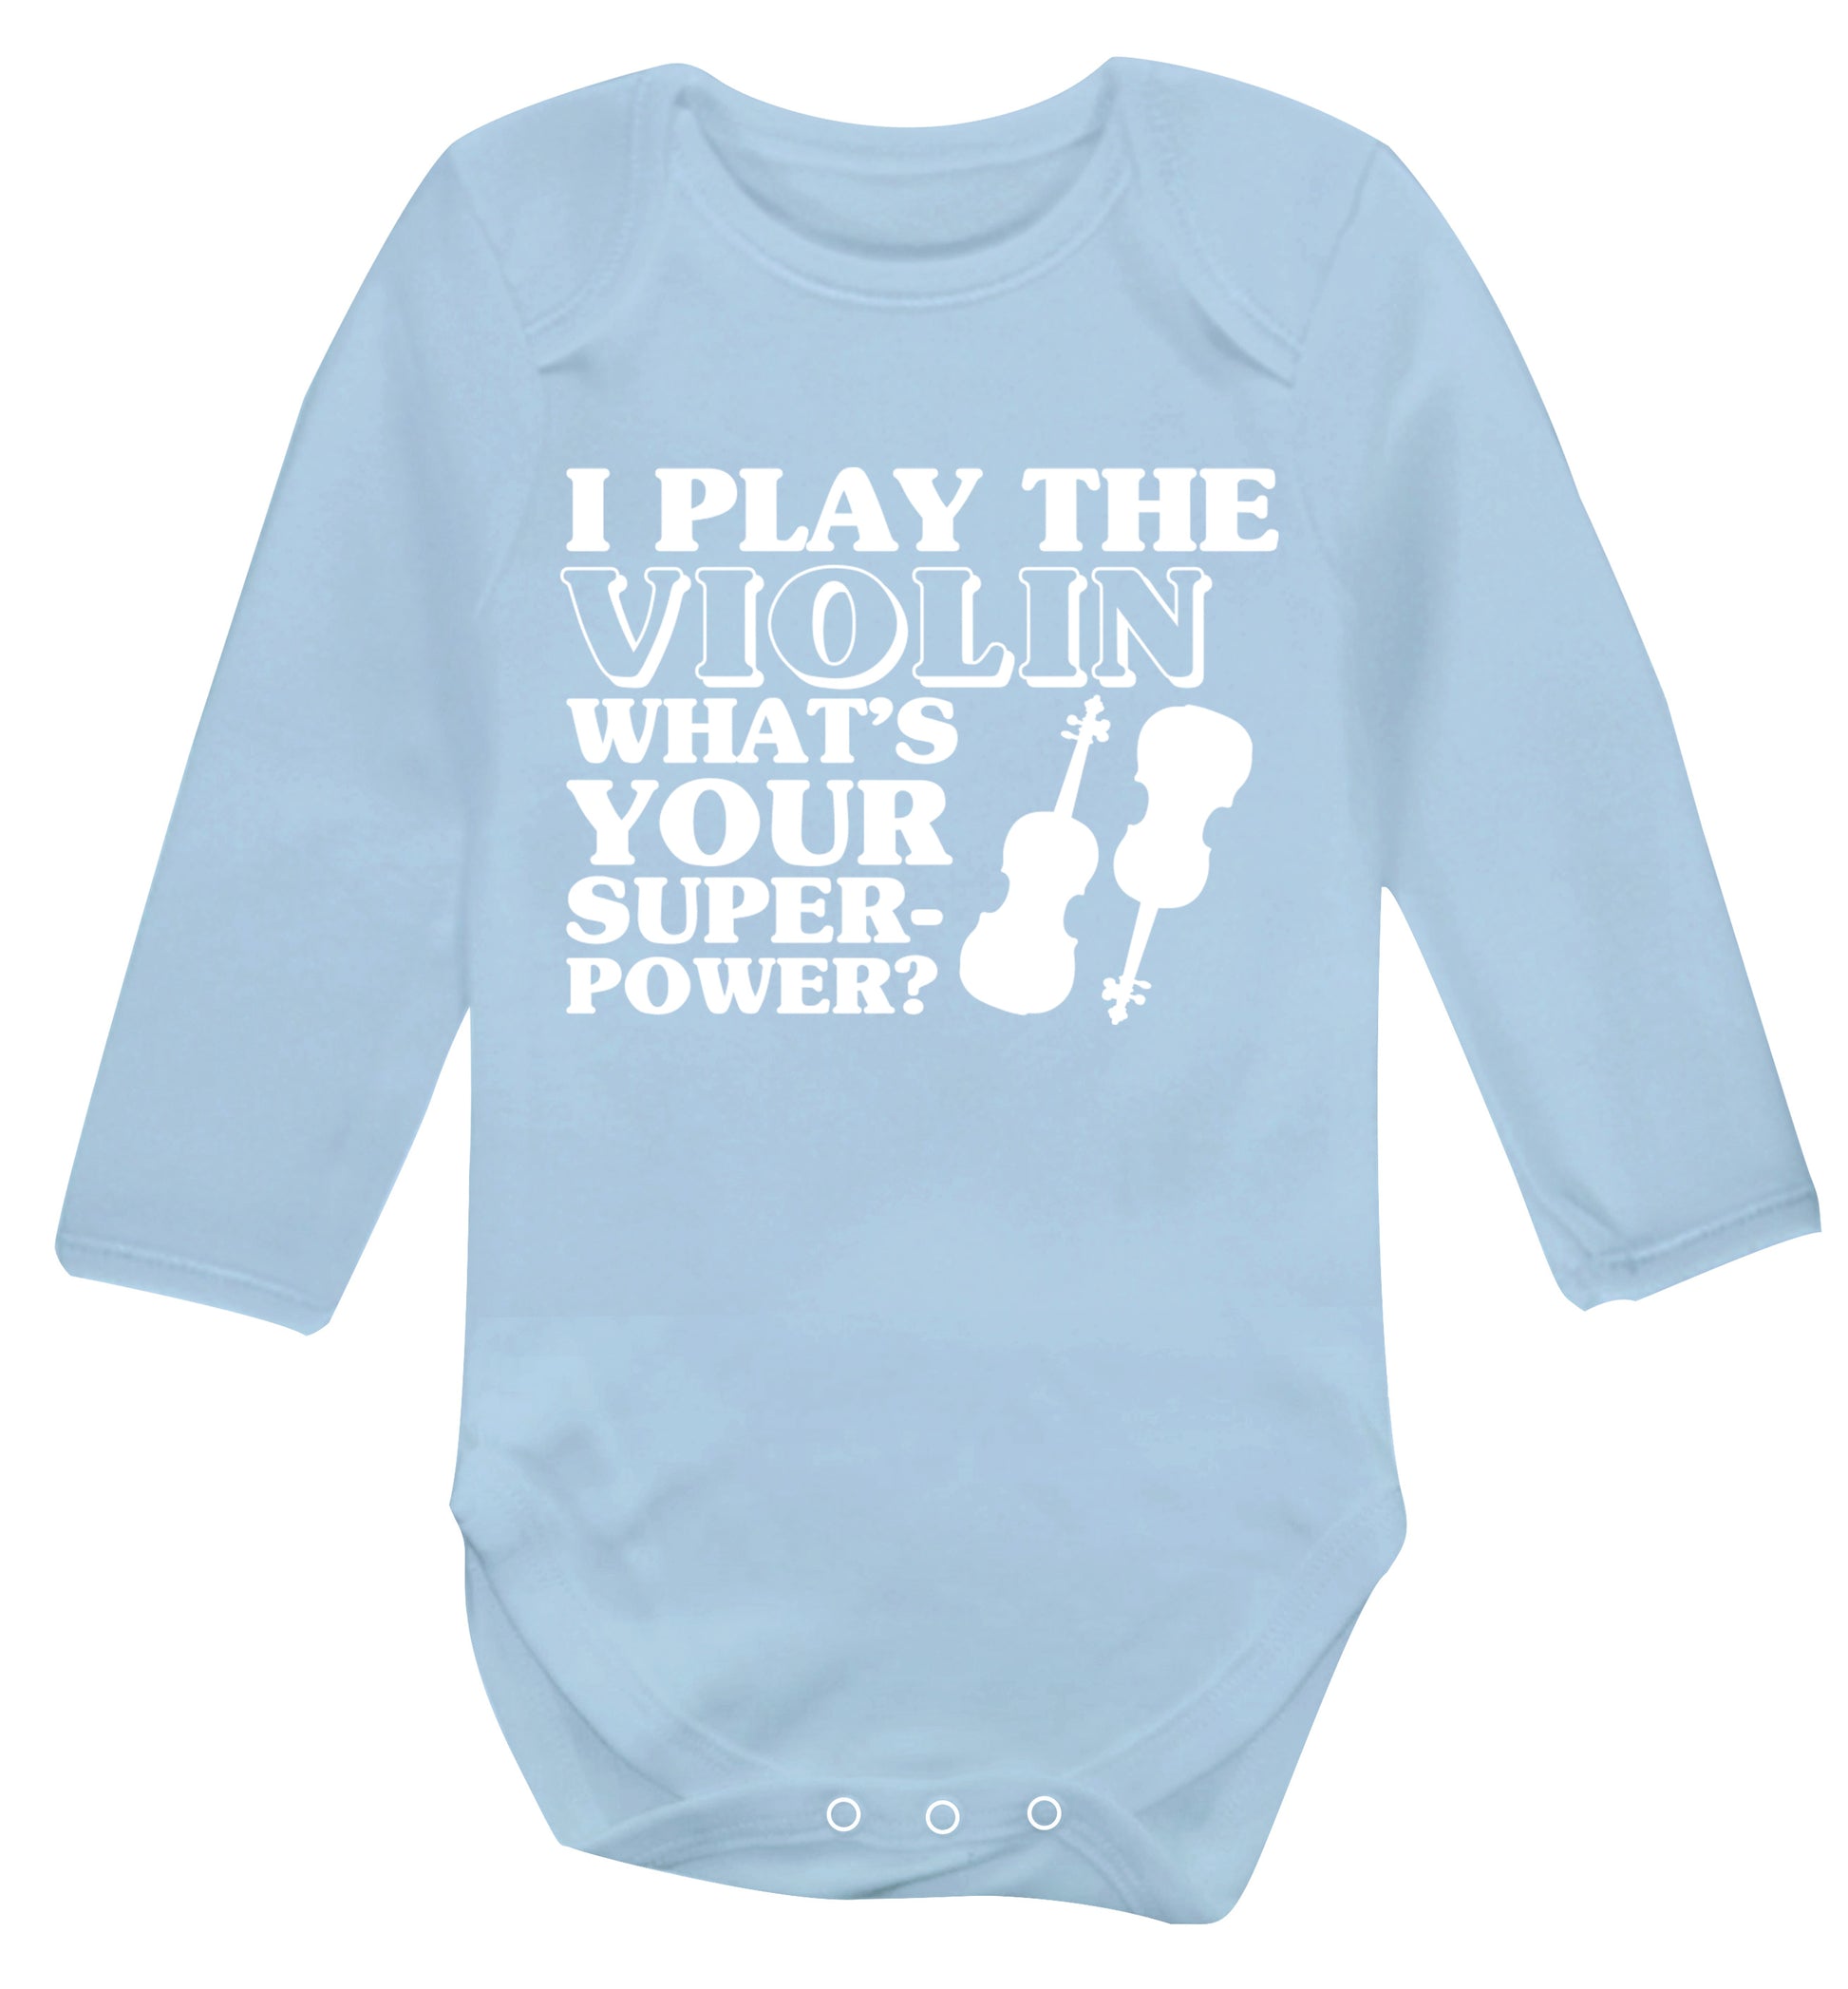 I Play Violin What's Your Superpower? Baby Vest long sleeved pale blue 6-12 months